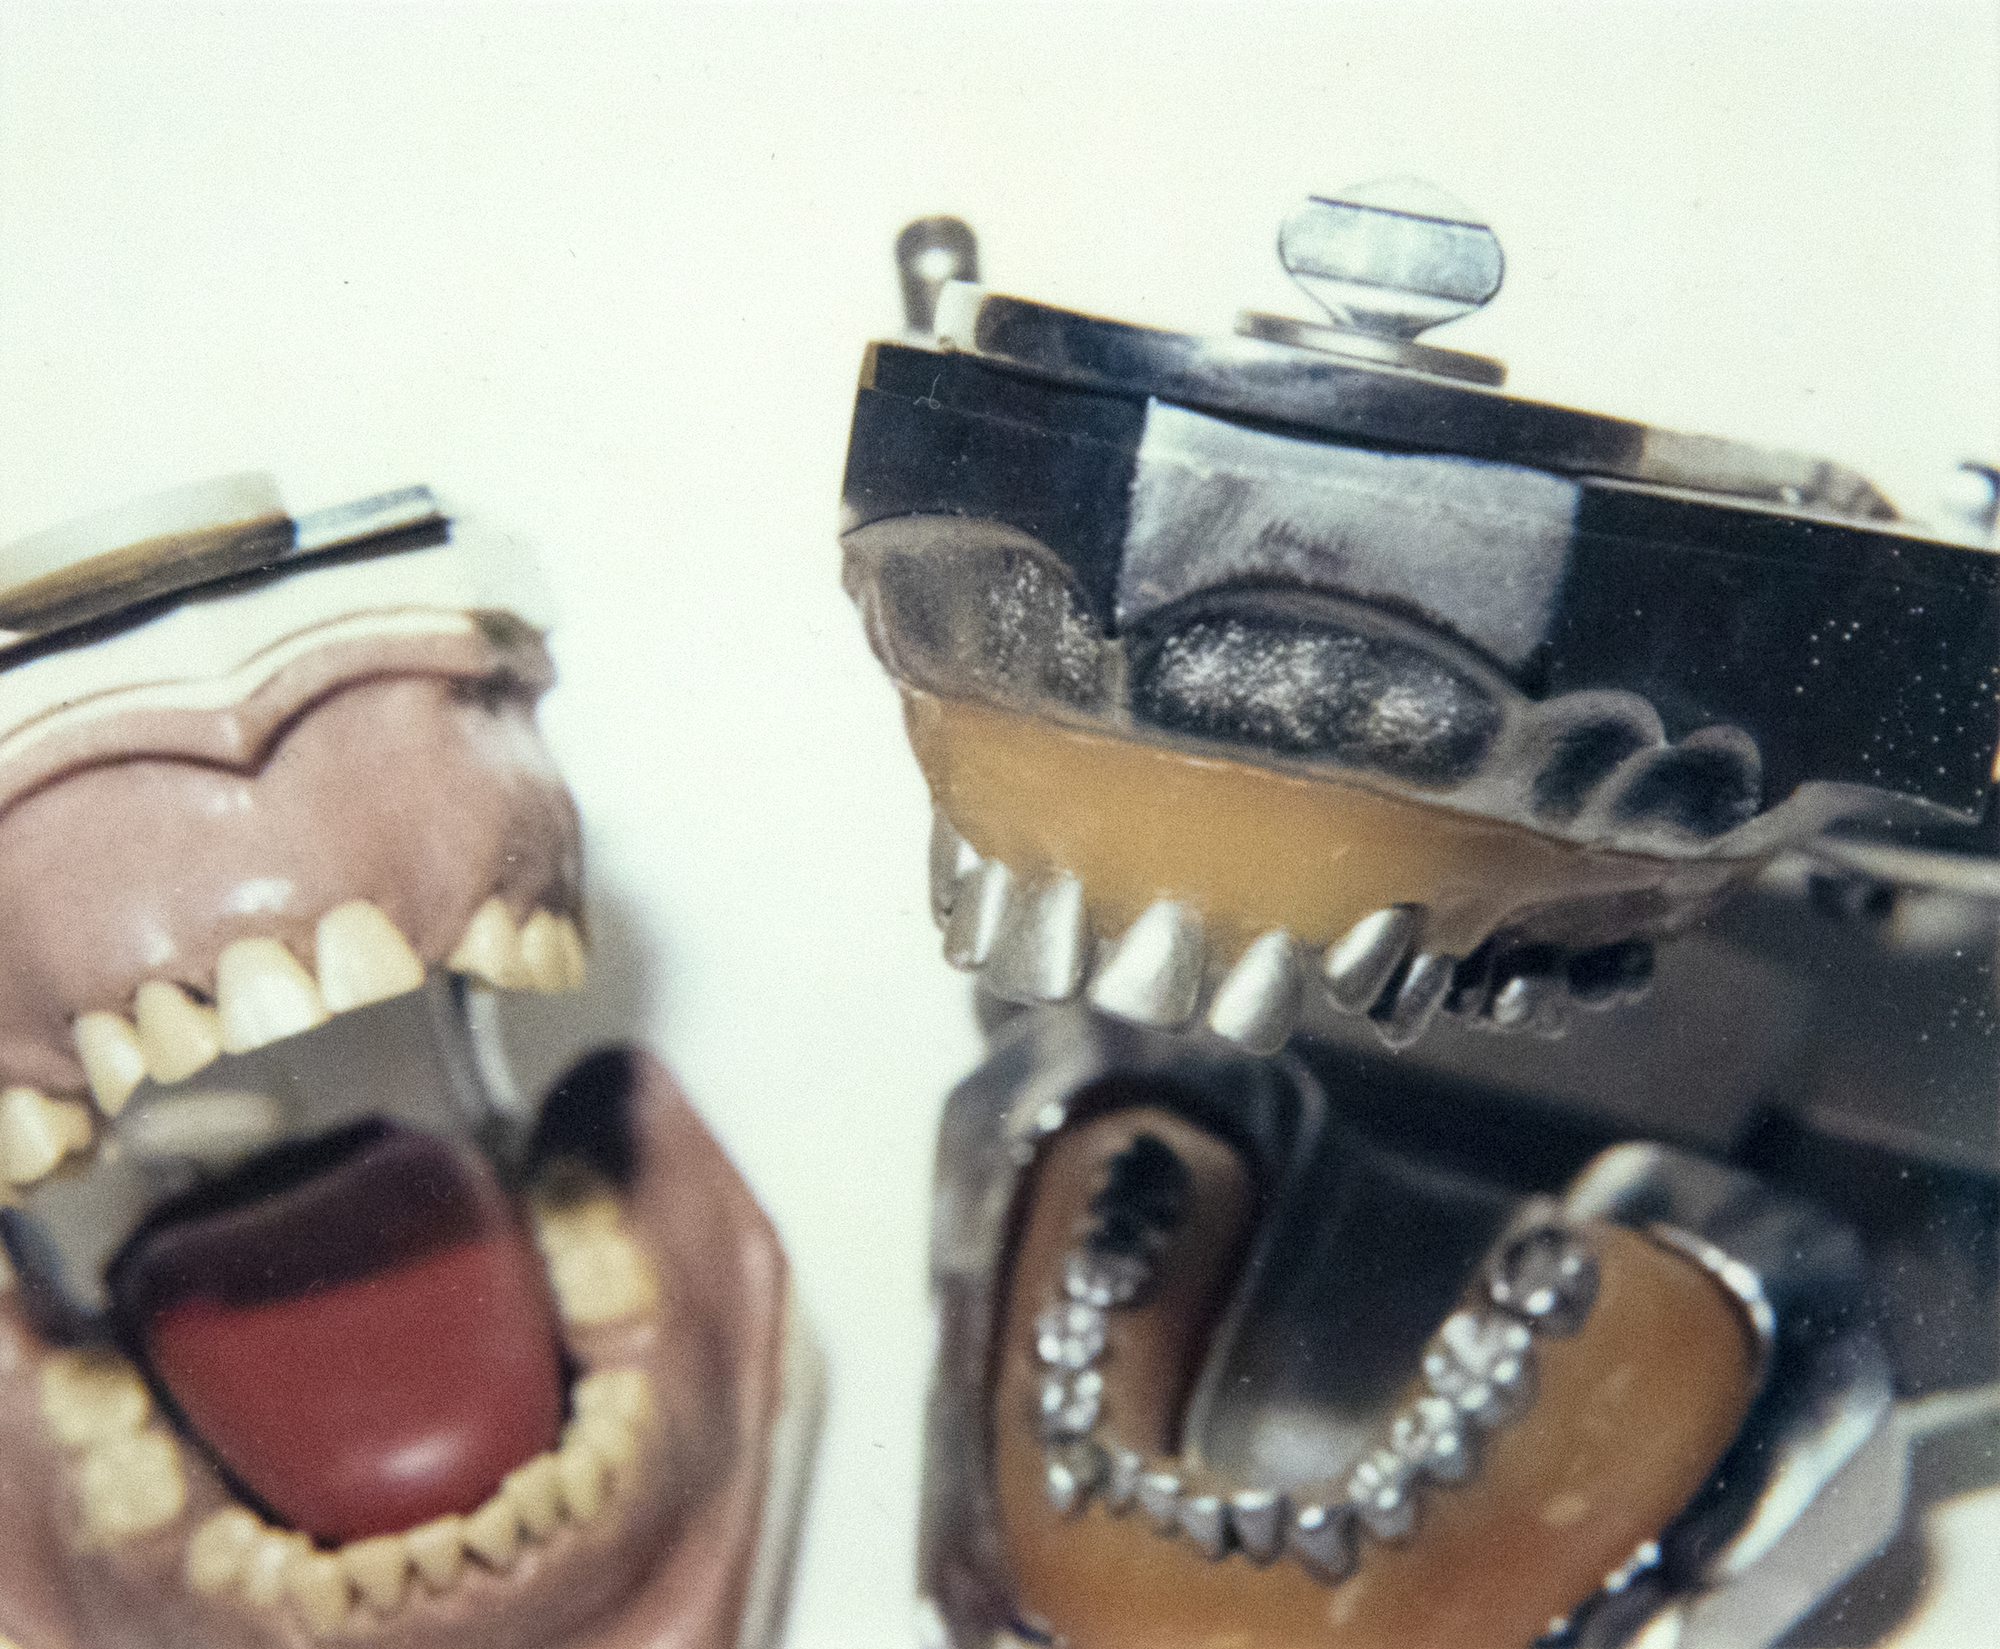 ANDY WARHOL - Dental Molds - Polaroid, Polacolor - 3 3/8 x 4 1/4 in.